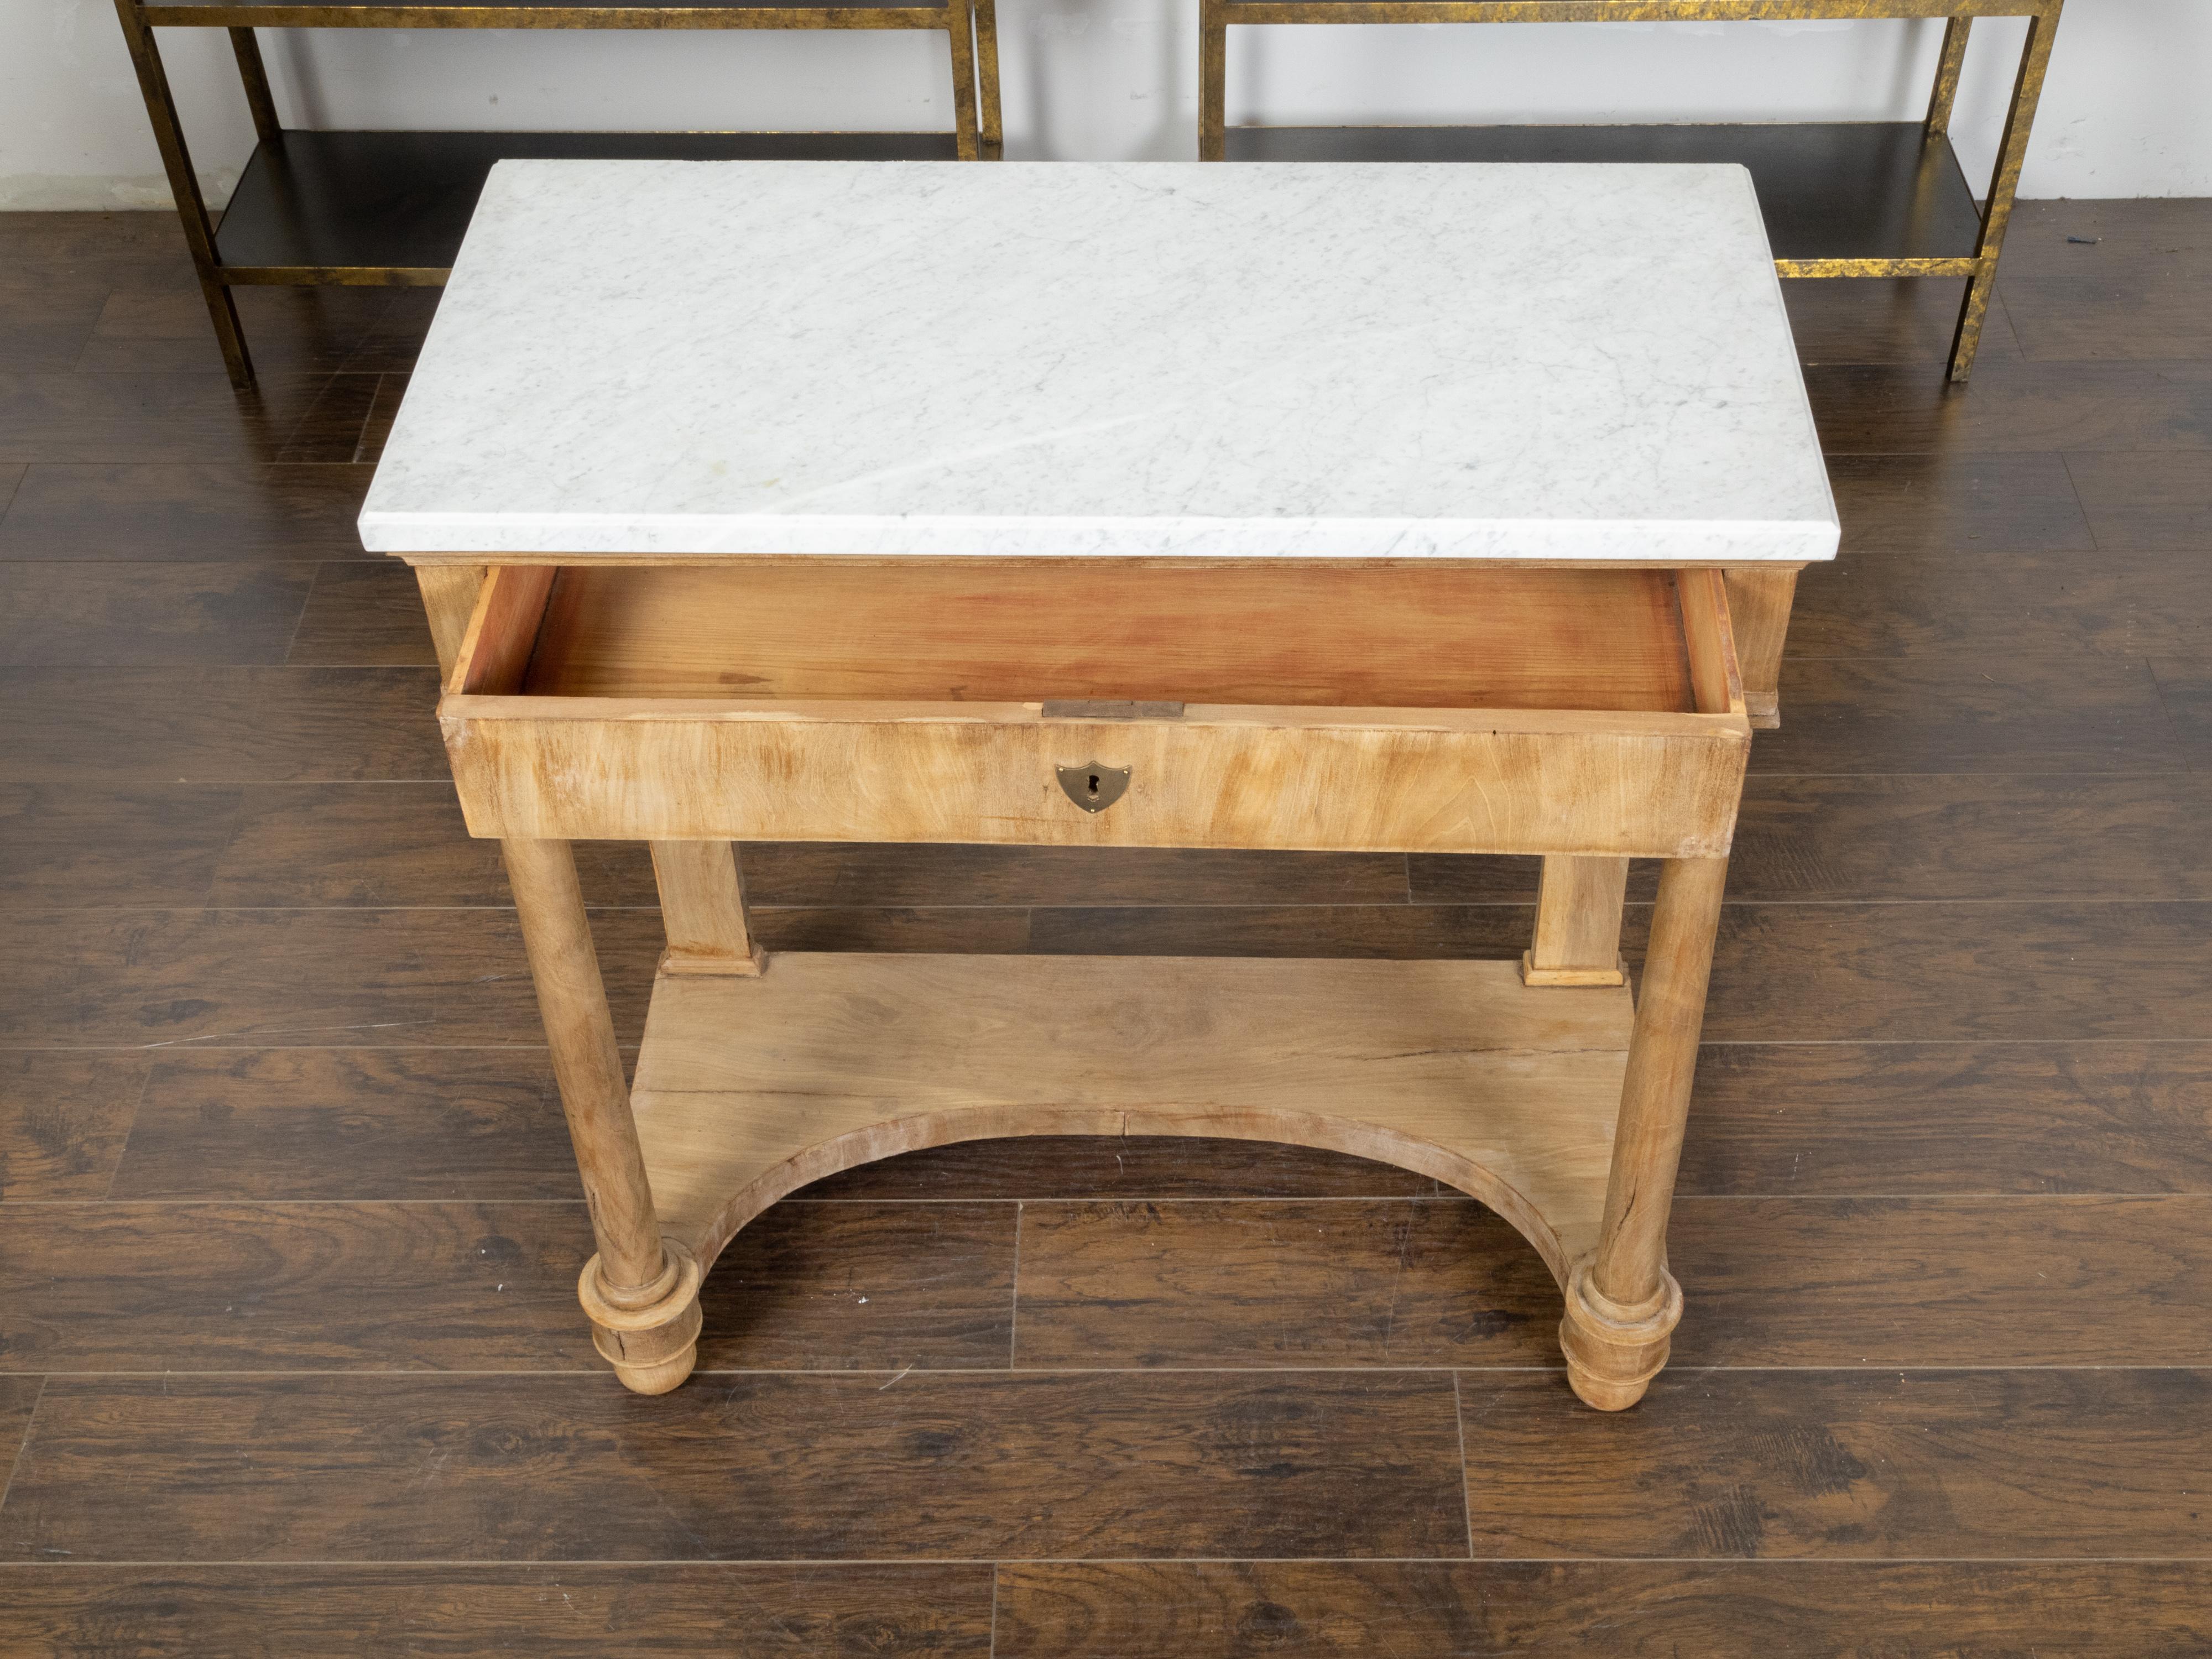 console table with marble top and drawers